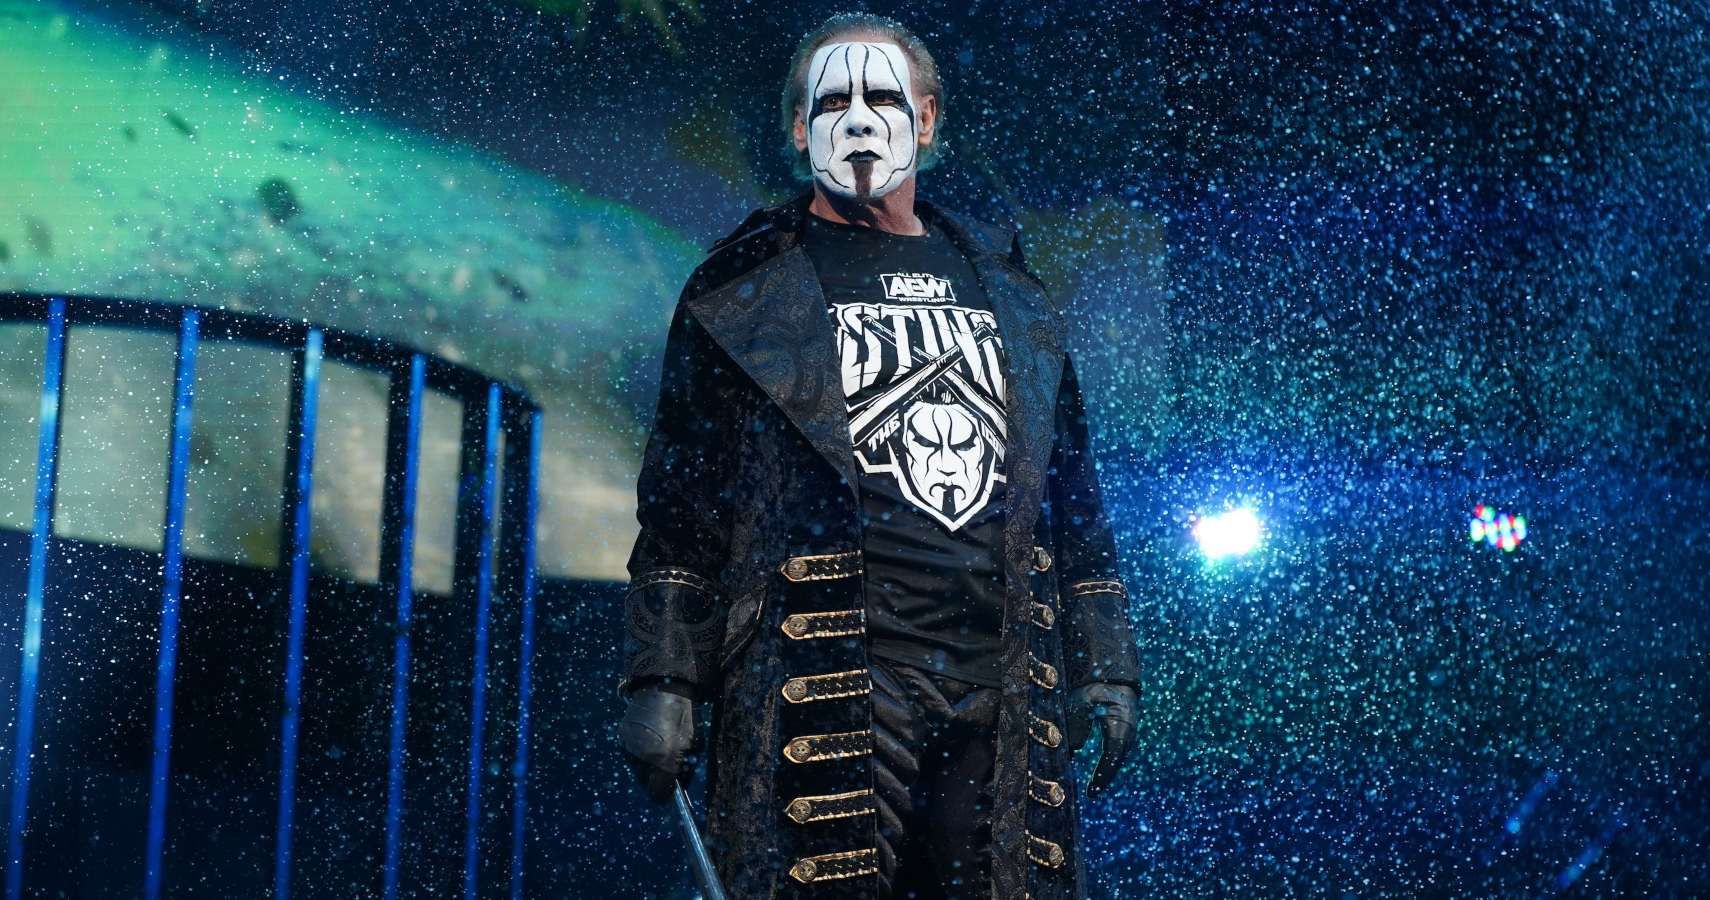 Booker T Comments On Sting's AEW Move, " He Missed A Ton Of A Career In WWE"